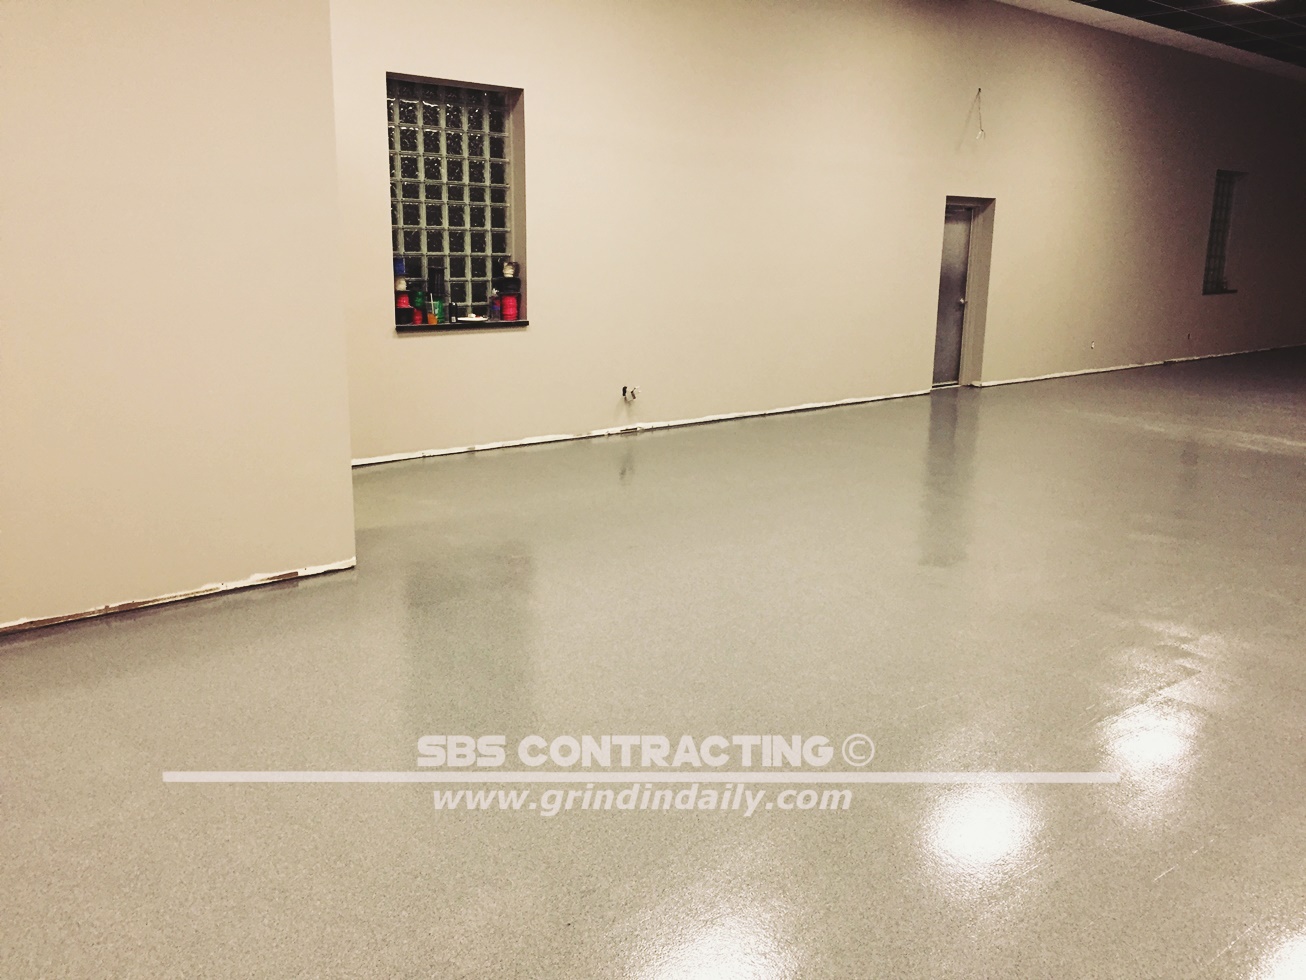 SBS-Contracting-Epoxy-Project-10-06